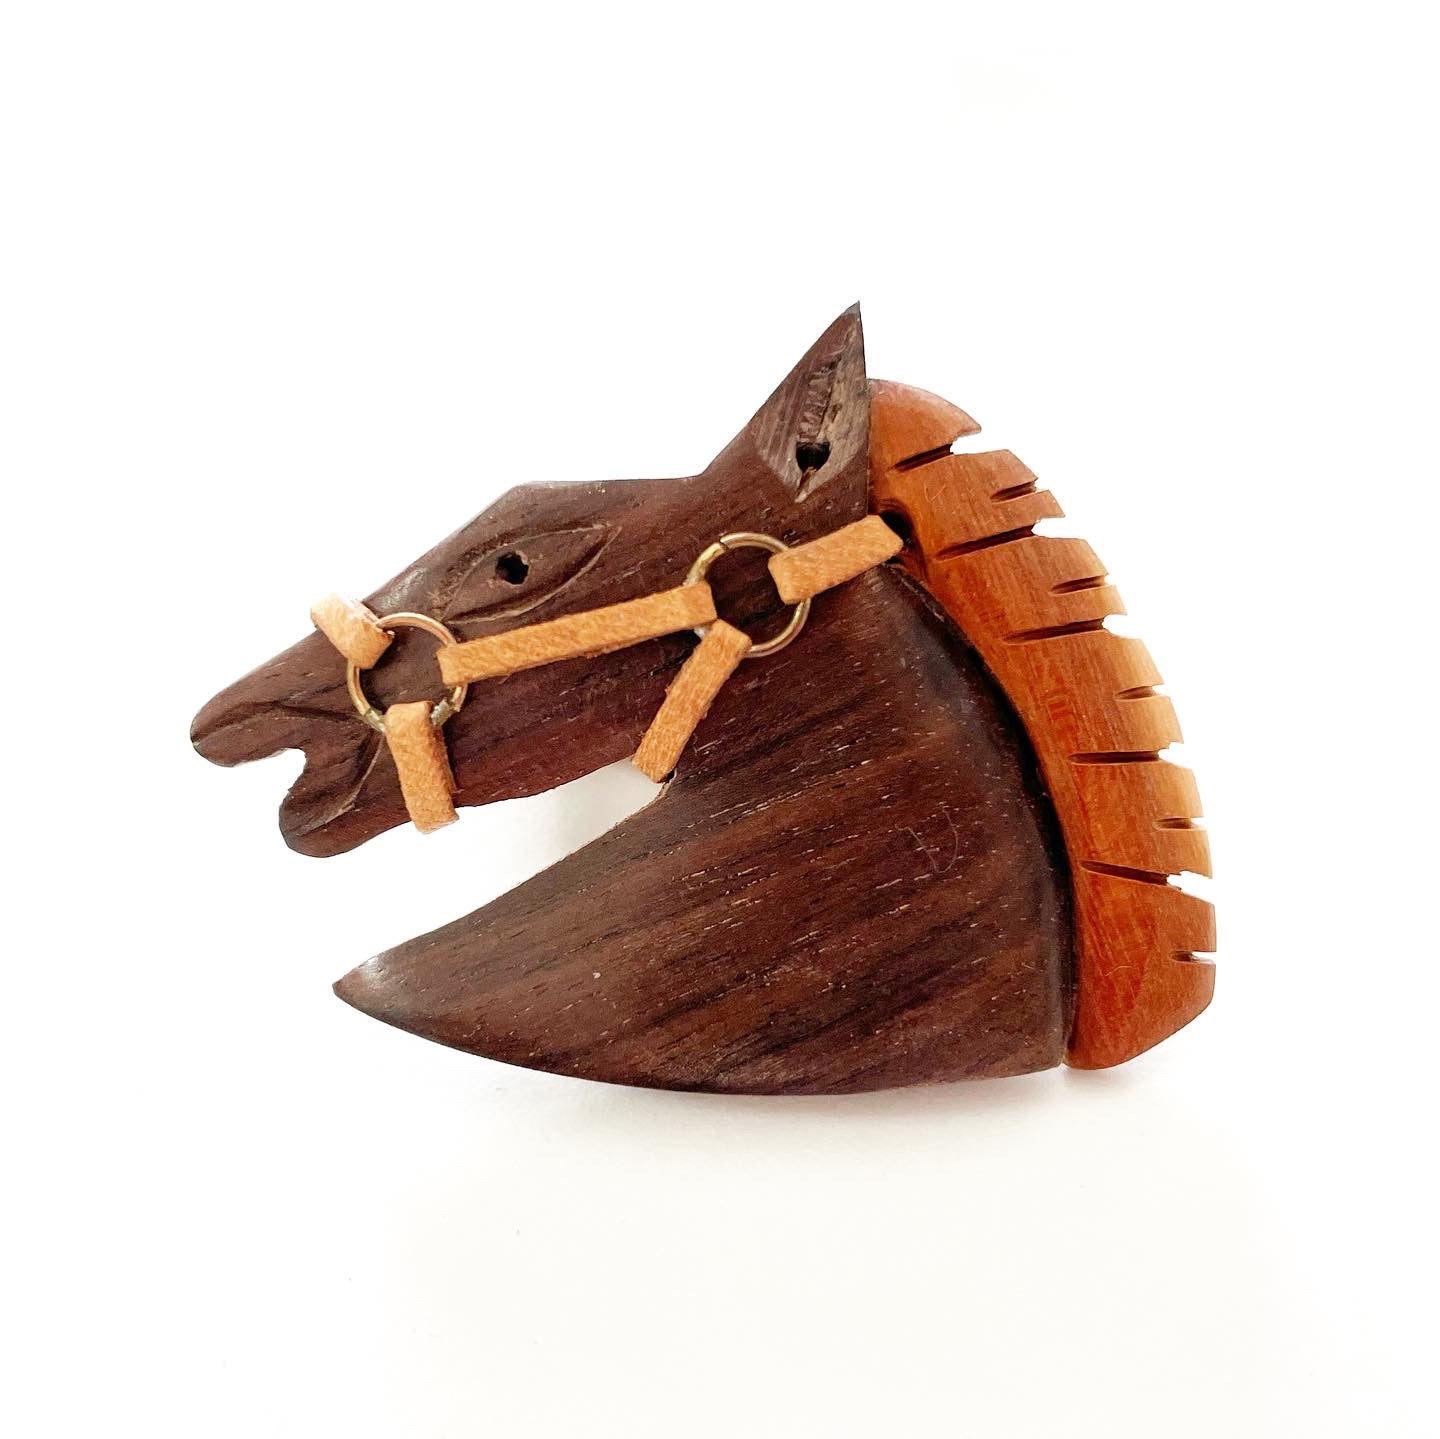 Wooden Scarf Ring (Horse Head with Leather Bridle) 木製絲巾扣 (駿馬籠頭)